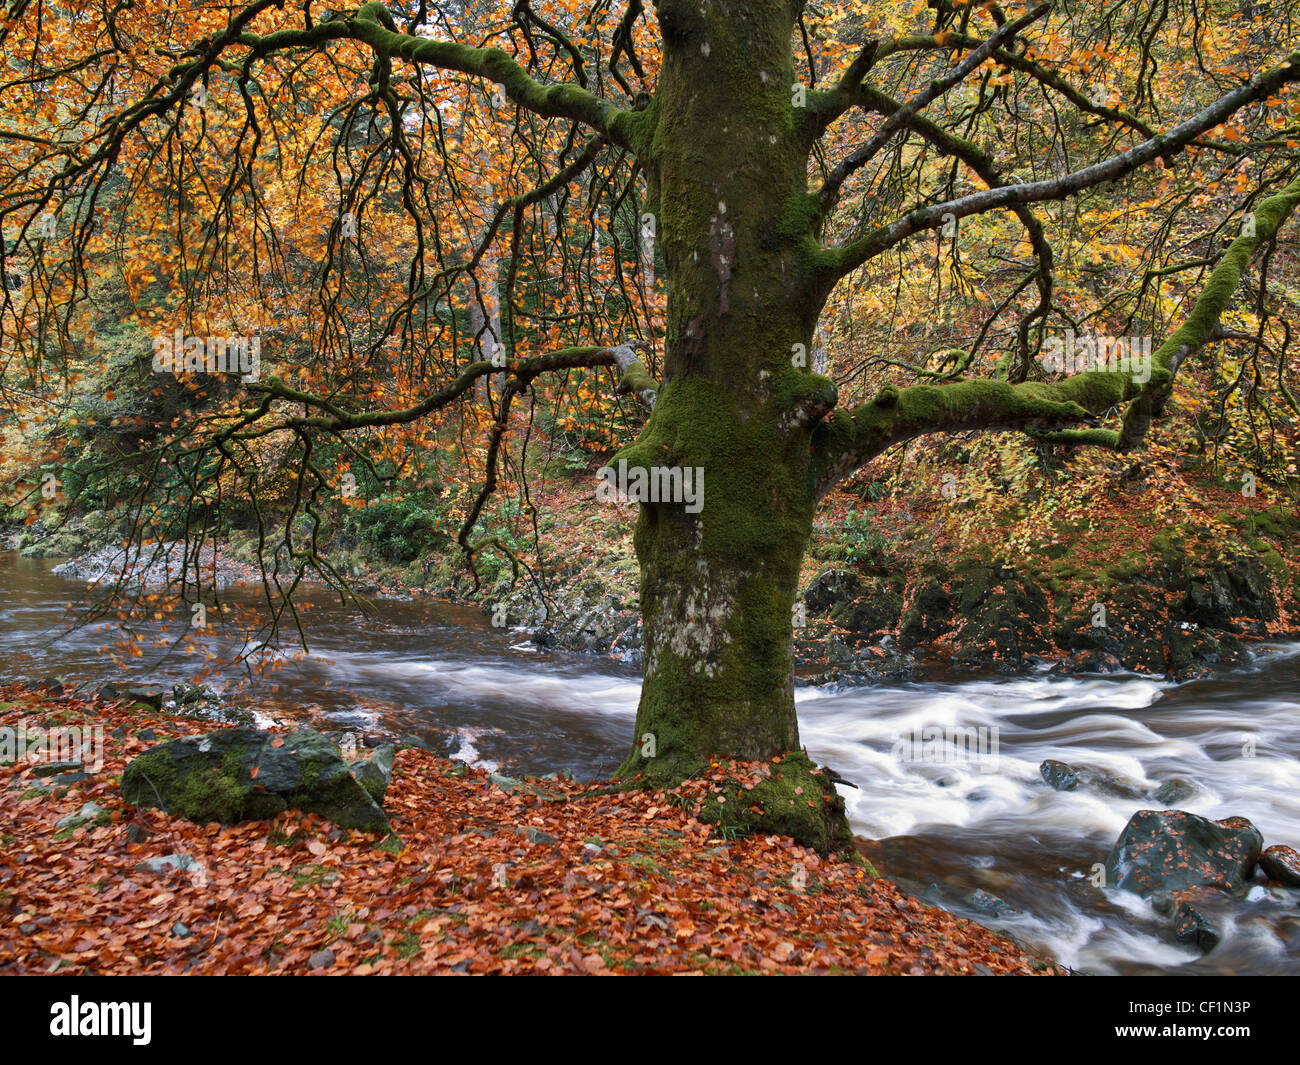 An autumnal scene in Coed y Brenin forest park in the South of the Snowdonia National Park near Dolgellau. Stock Photo